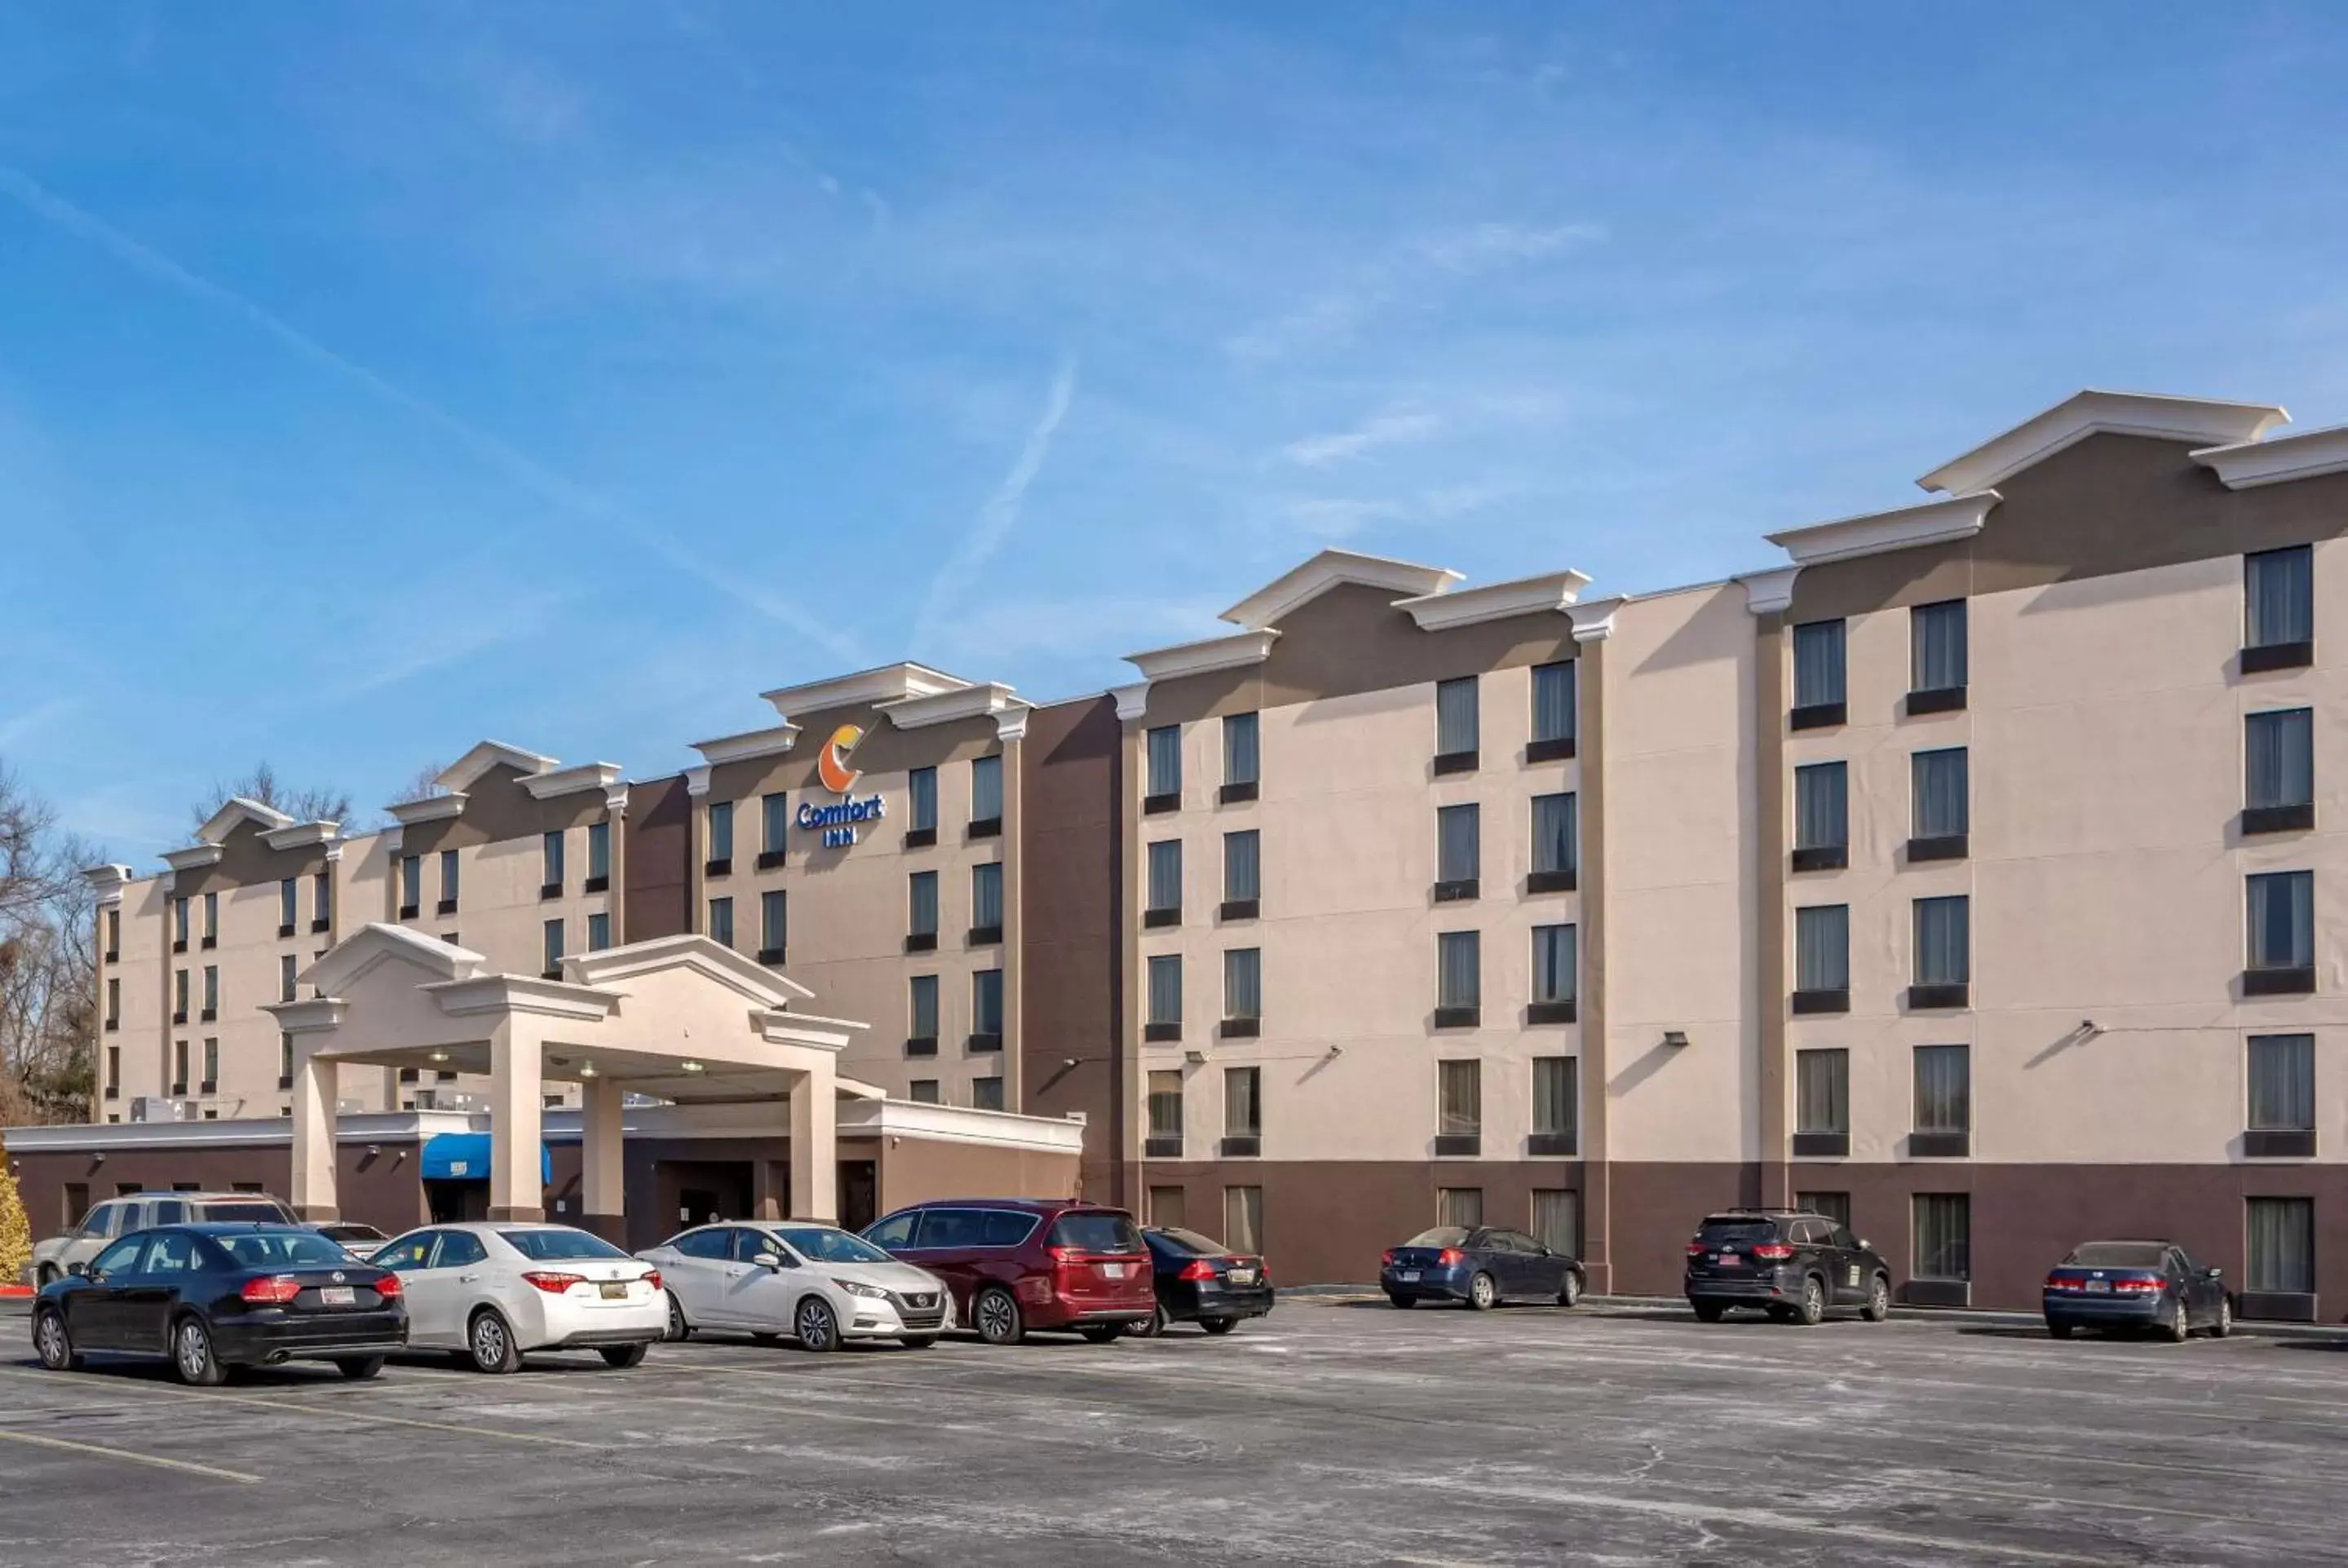 Property Building in Comfort Inn Towson